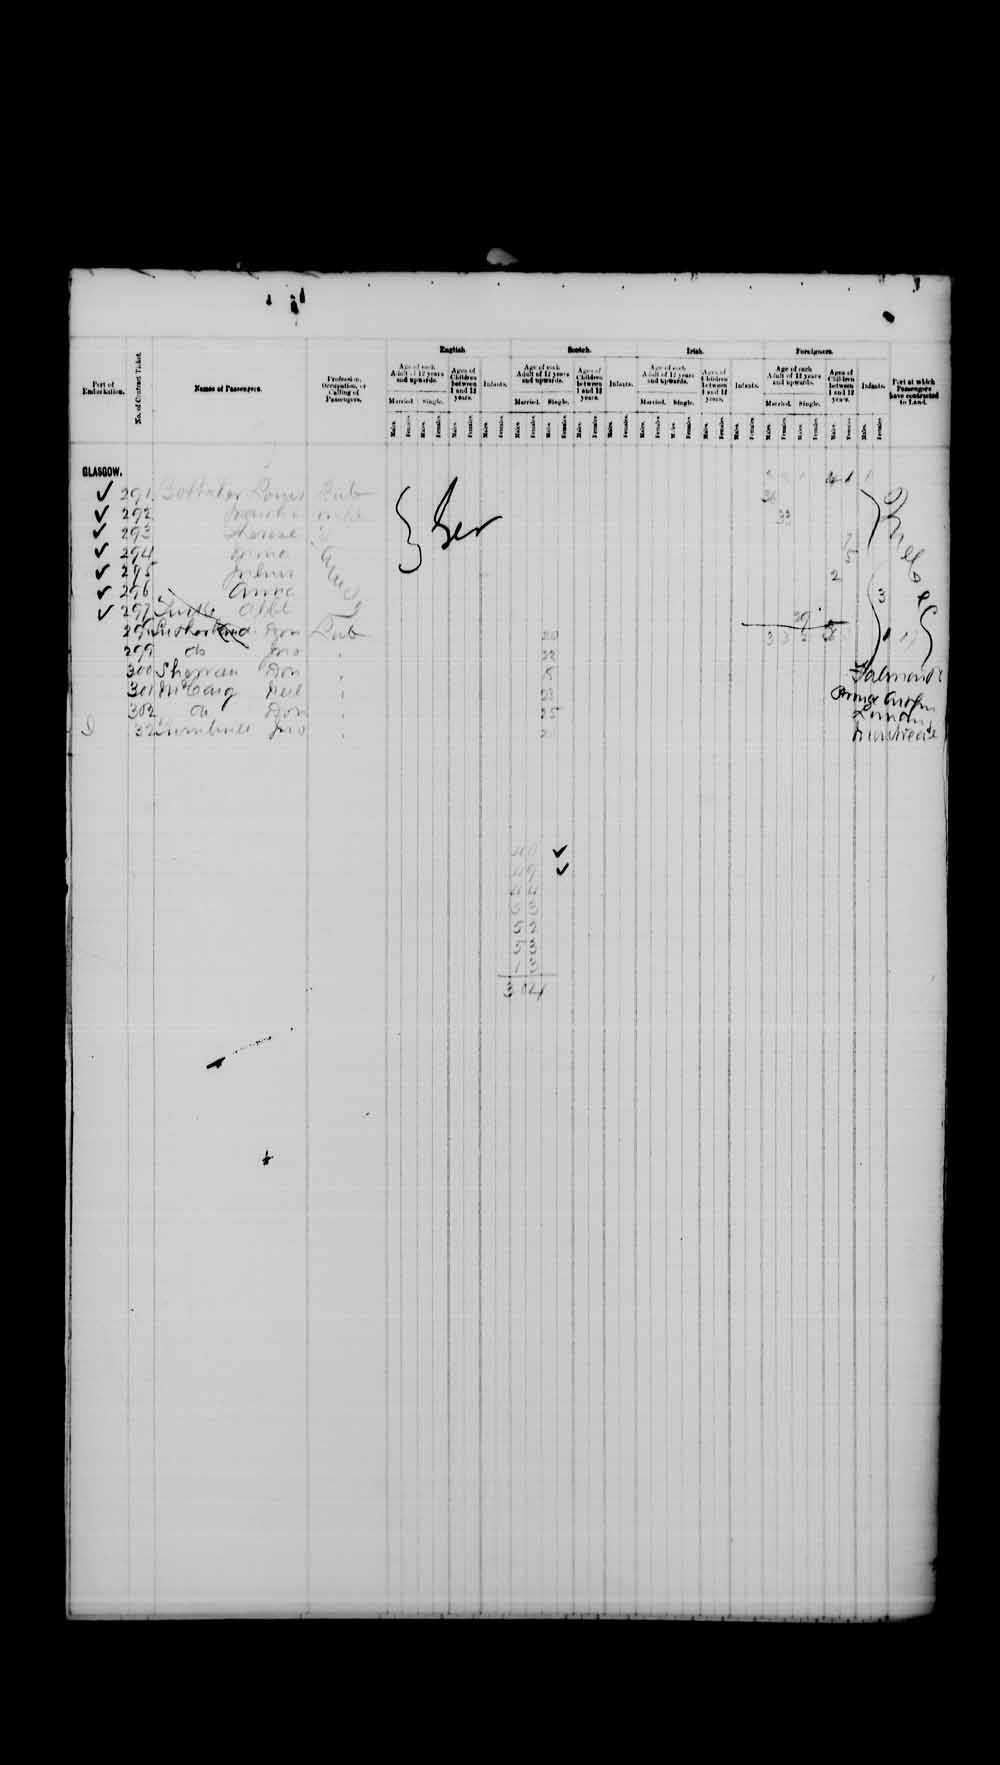 Digitized page of Passenger Lists for Image No.: e003543095